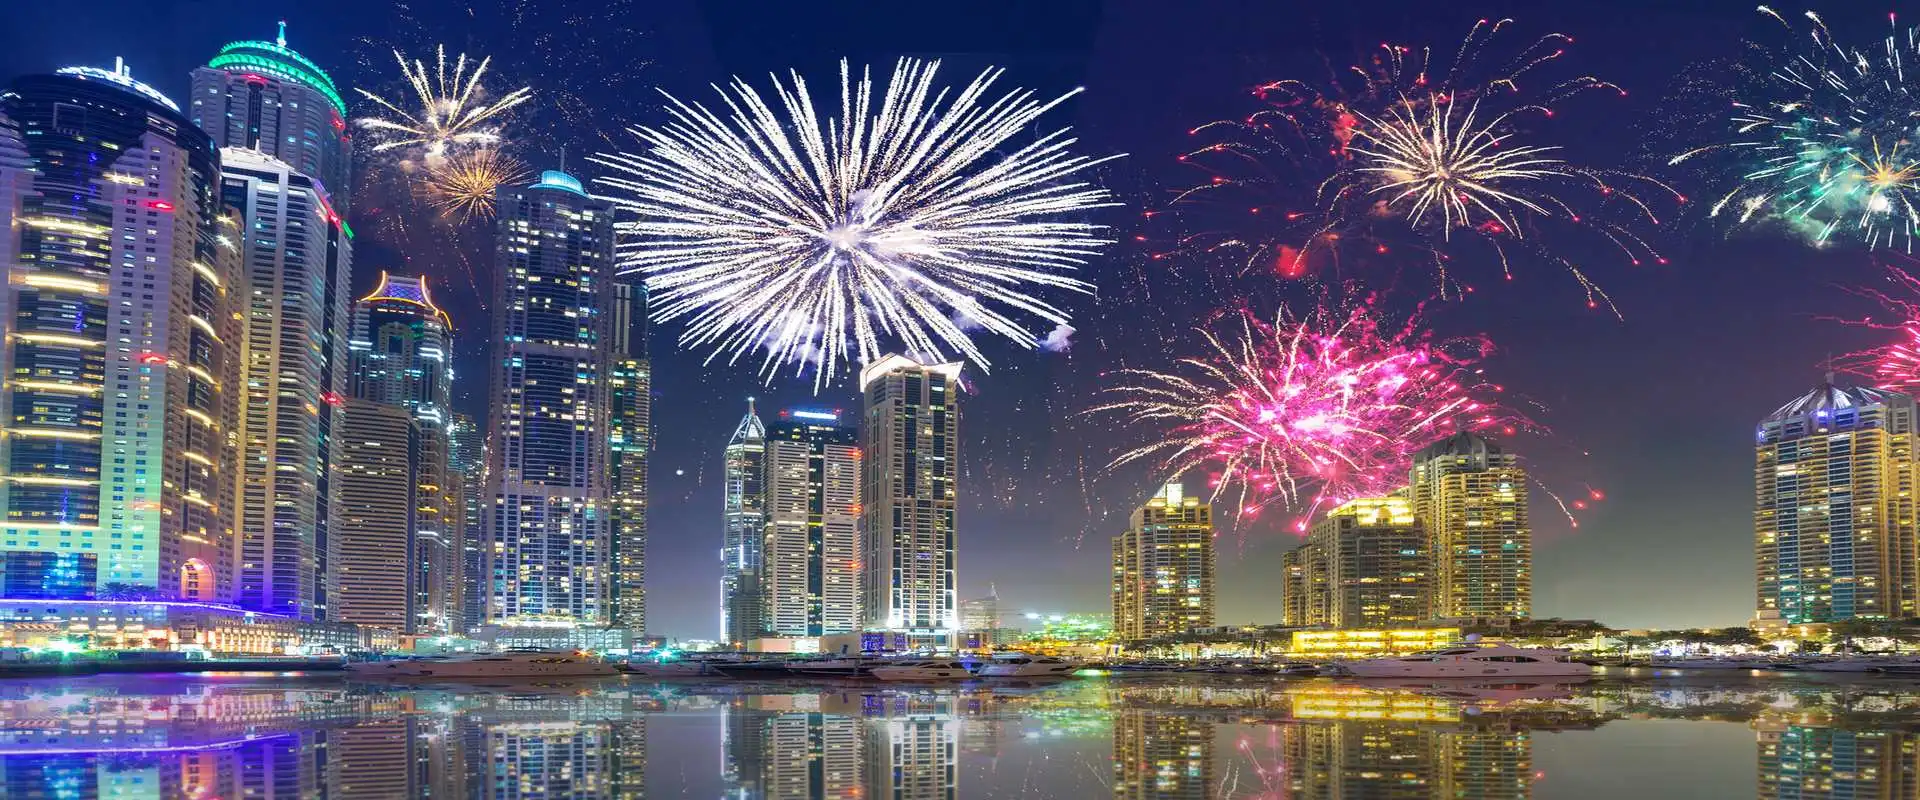 Before New Year's Eve, 75% of Dubai's hotels have already been booked